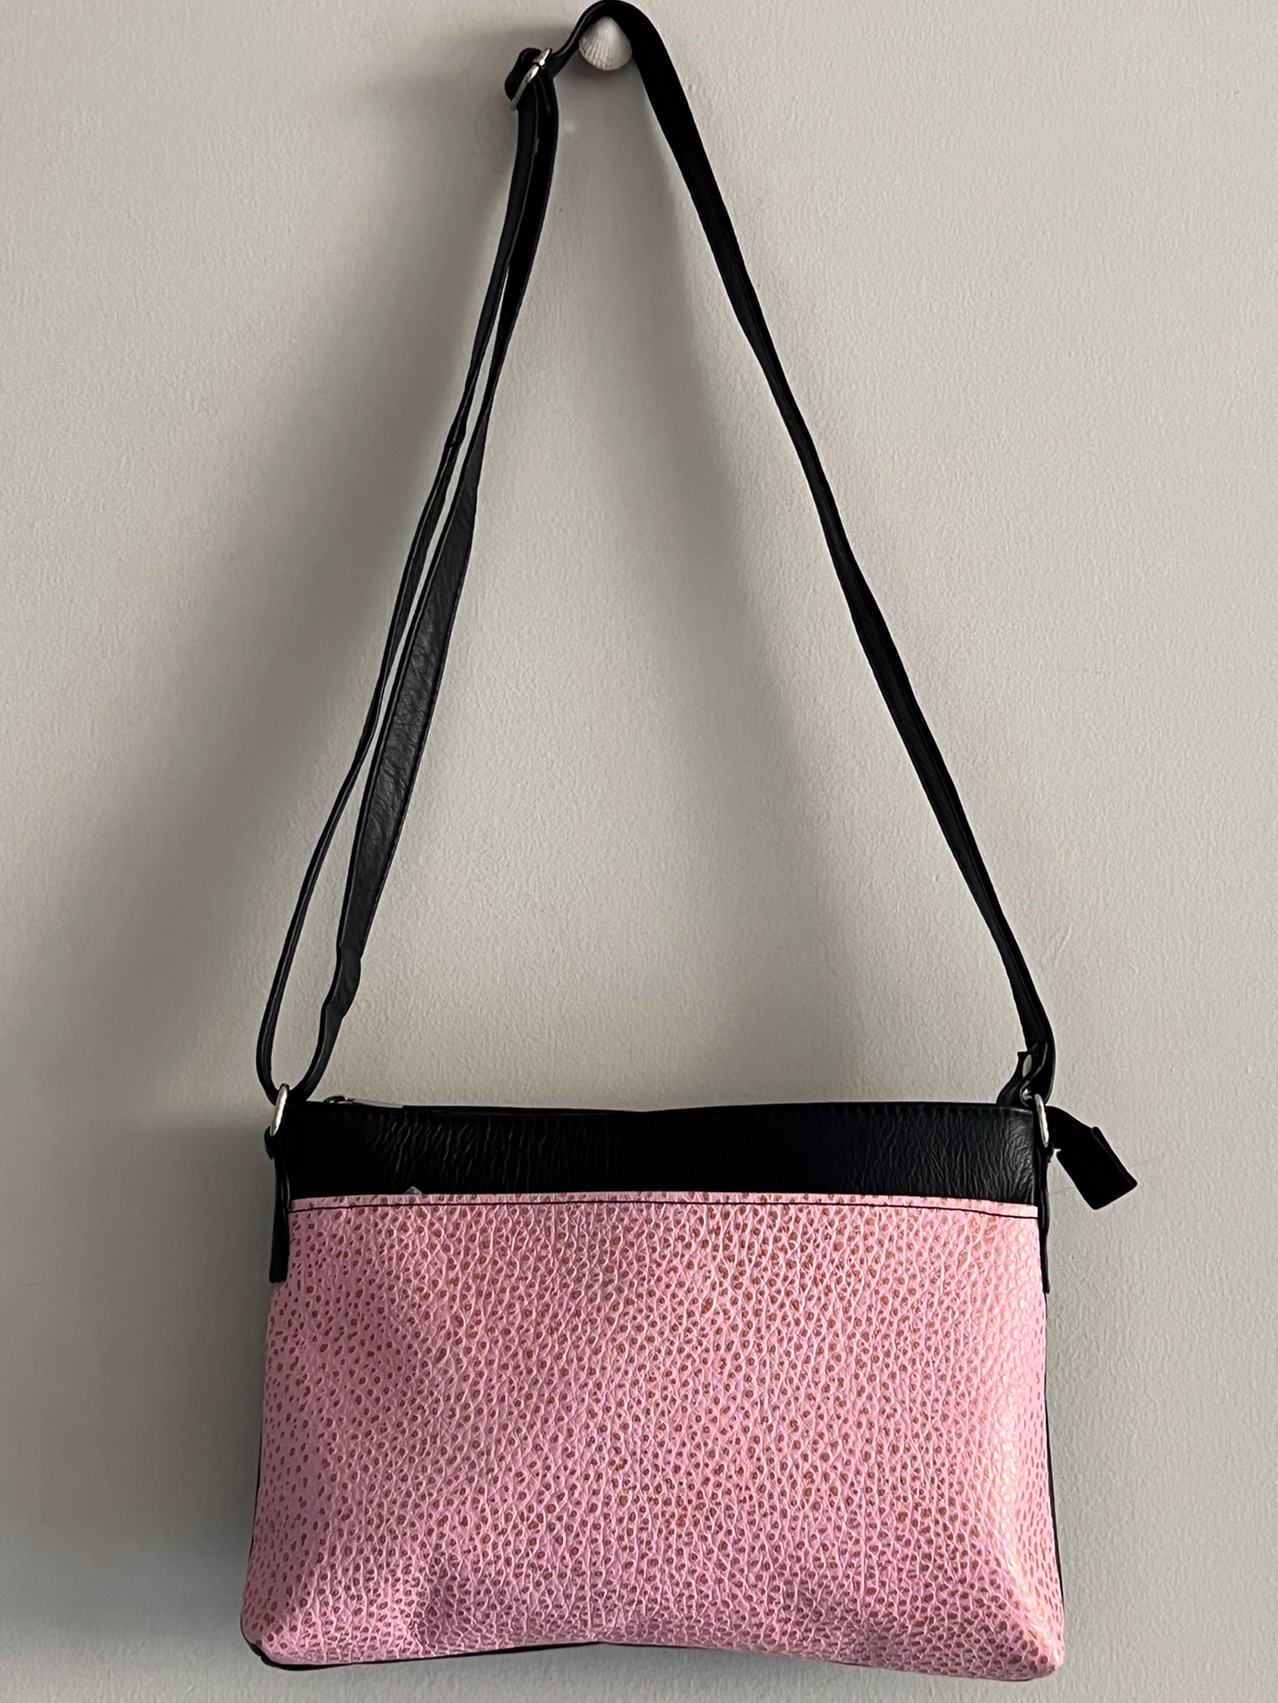 Pink and Black Leather Purse